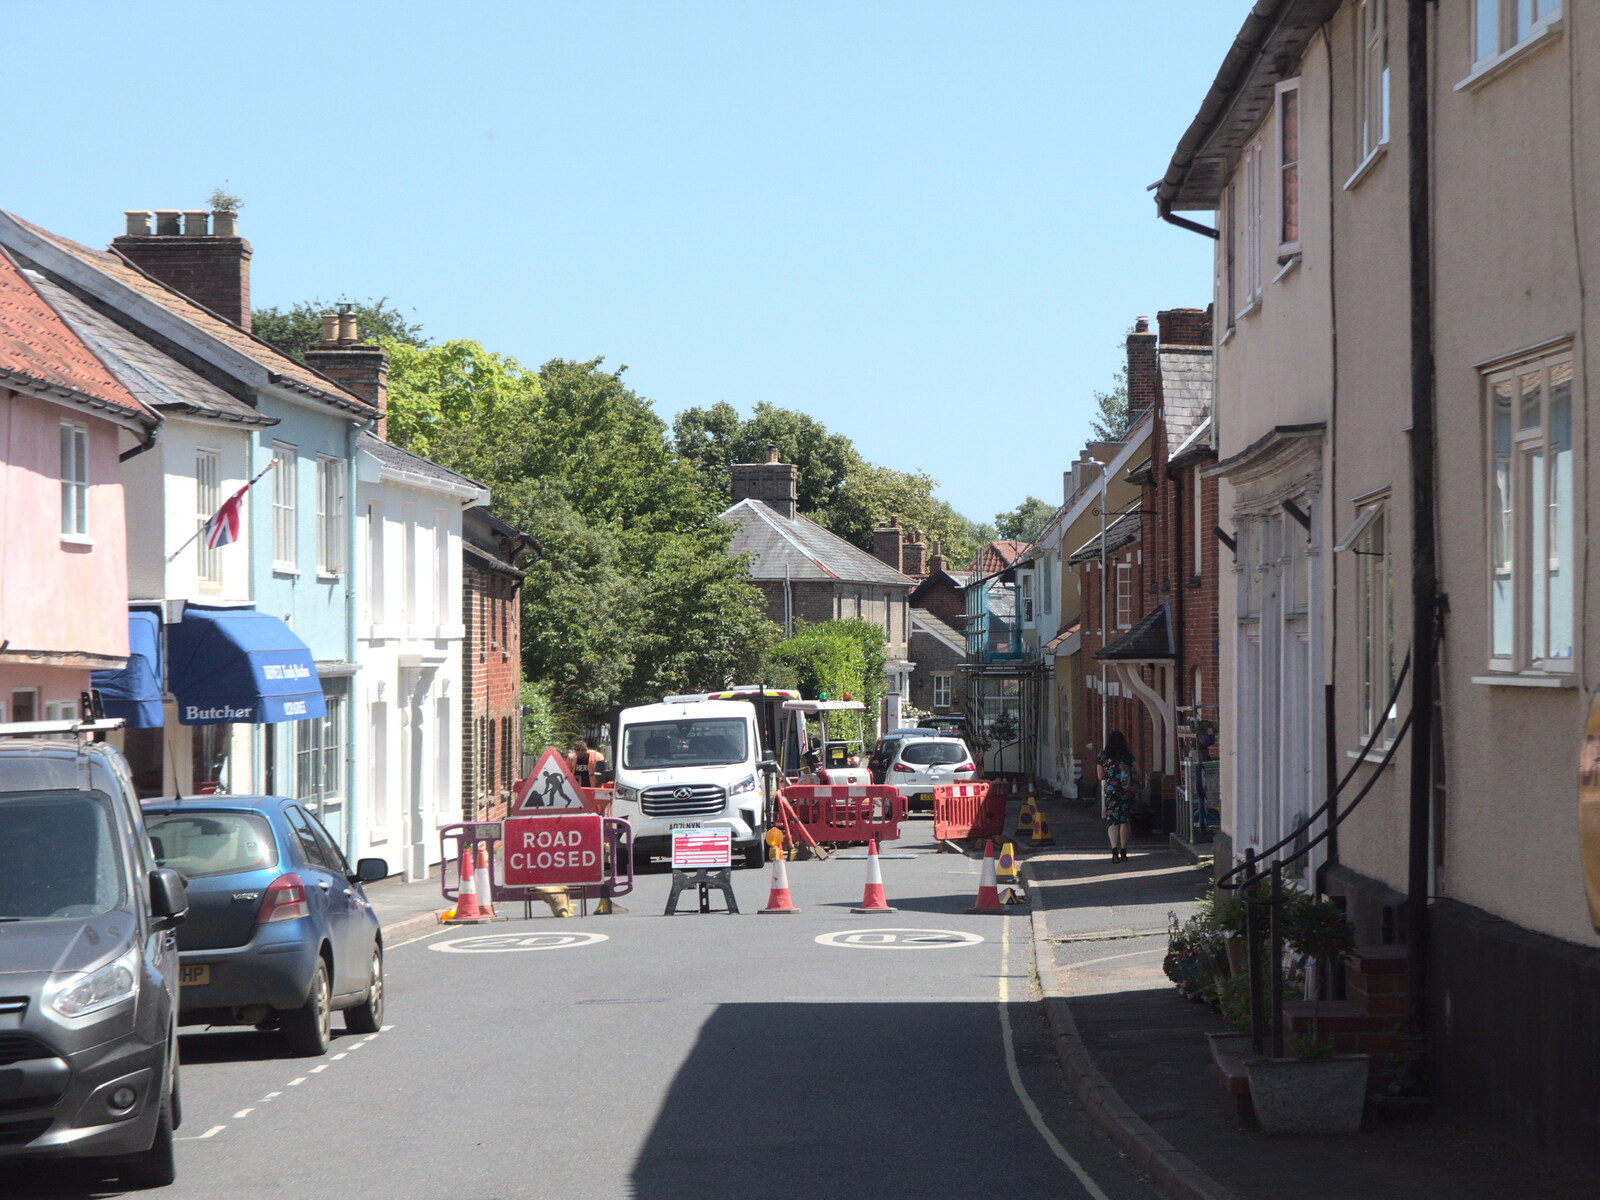 Church Street in Eye is totally closed from Pizza at the Village Hall, Brome, Suffolk - 24th June 2022